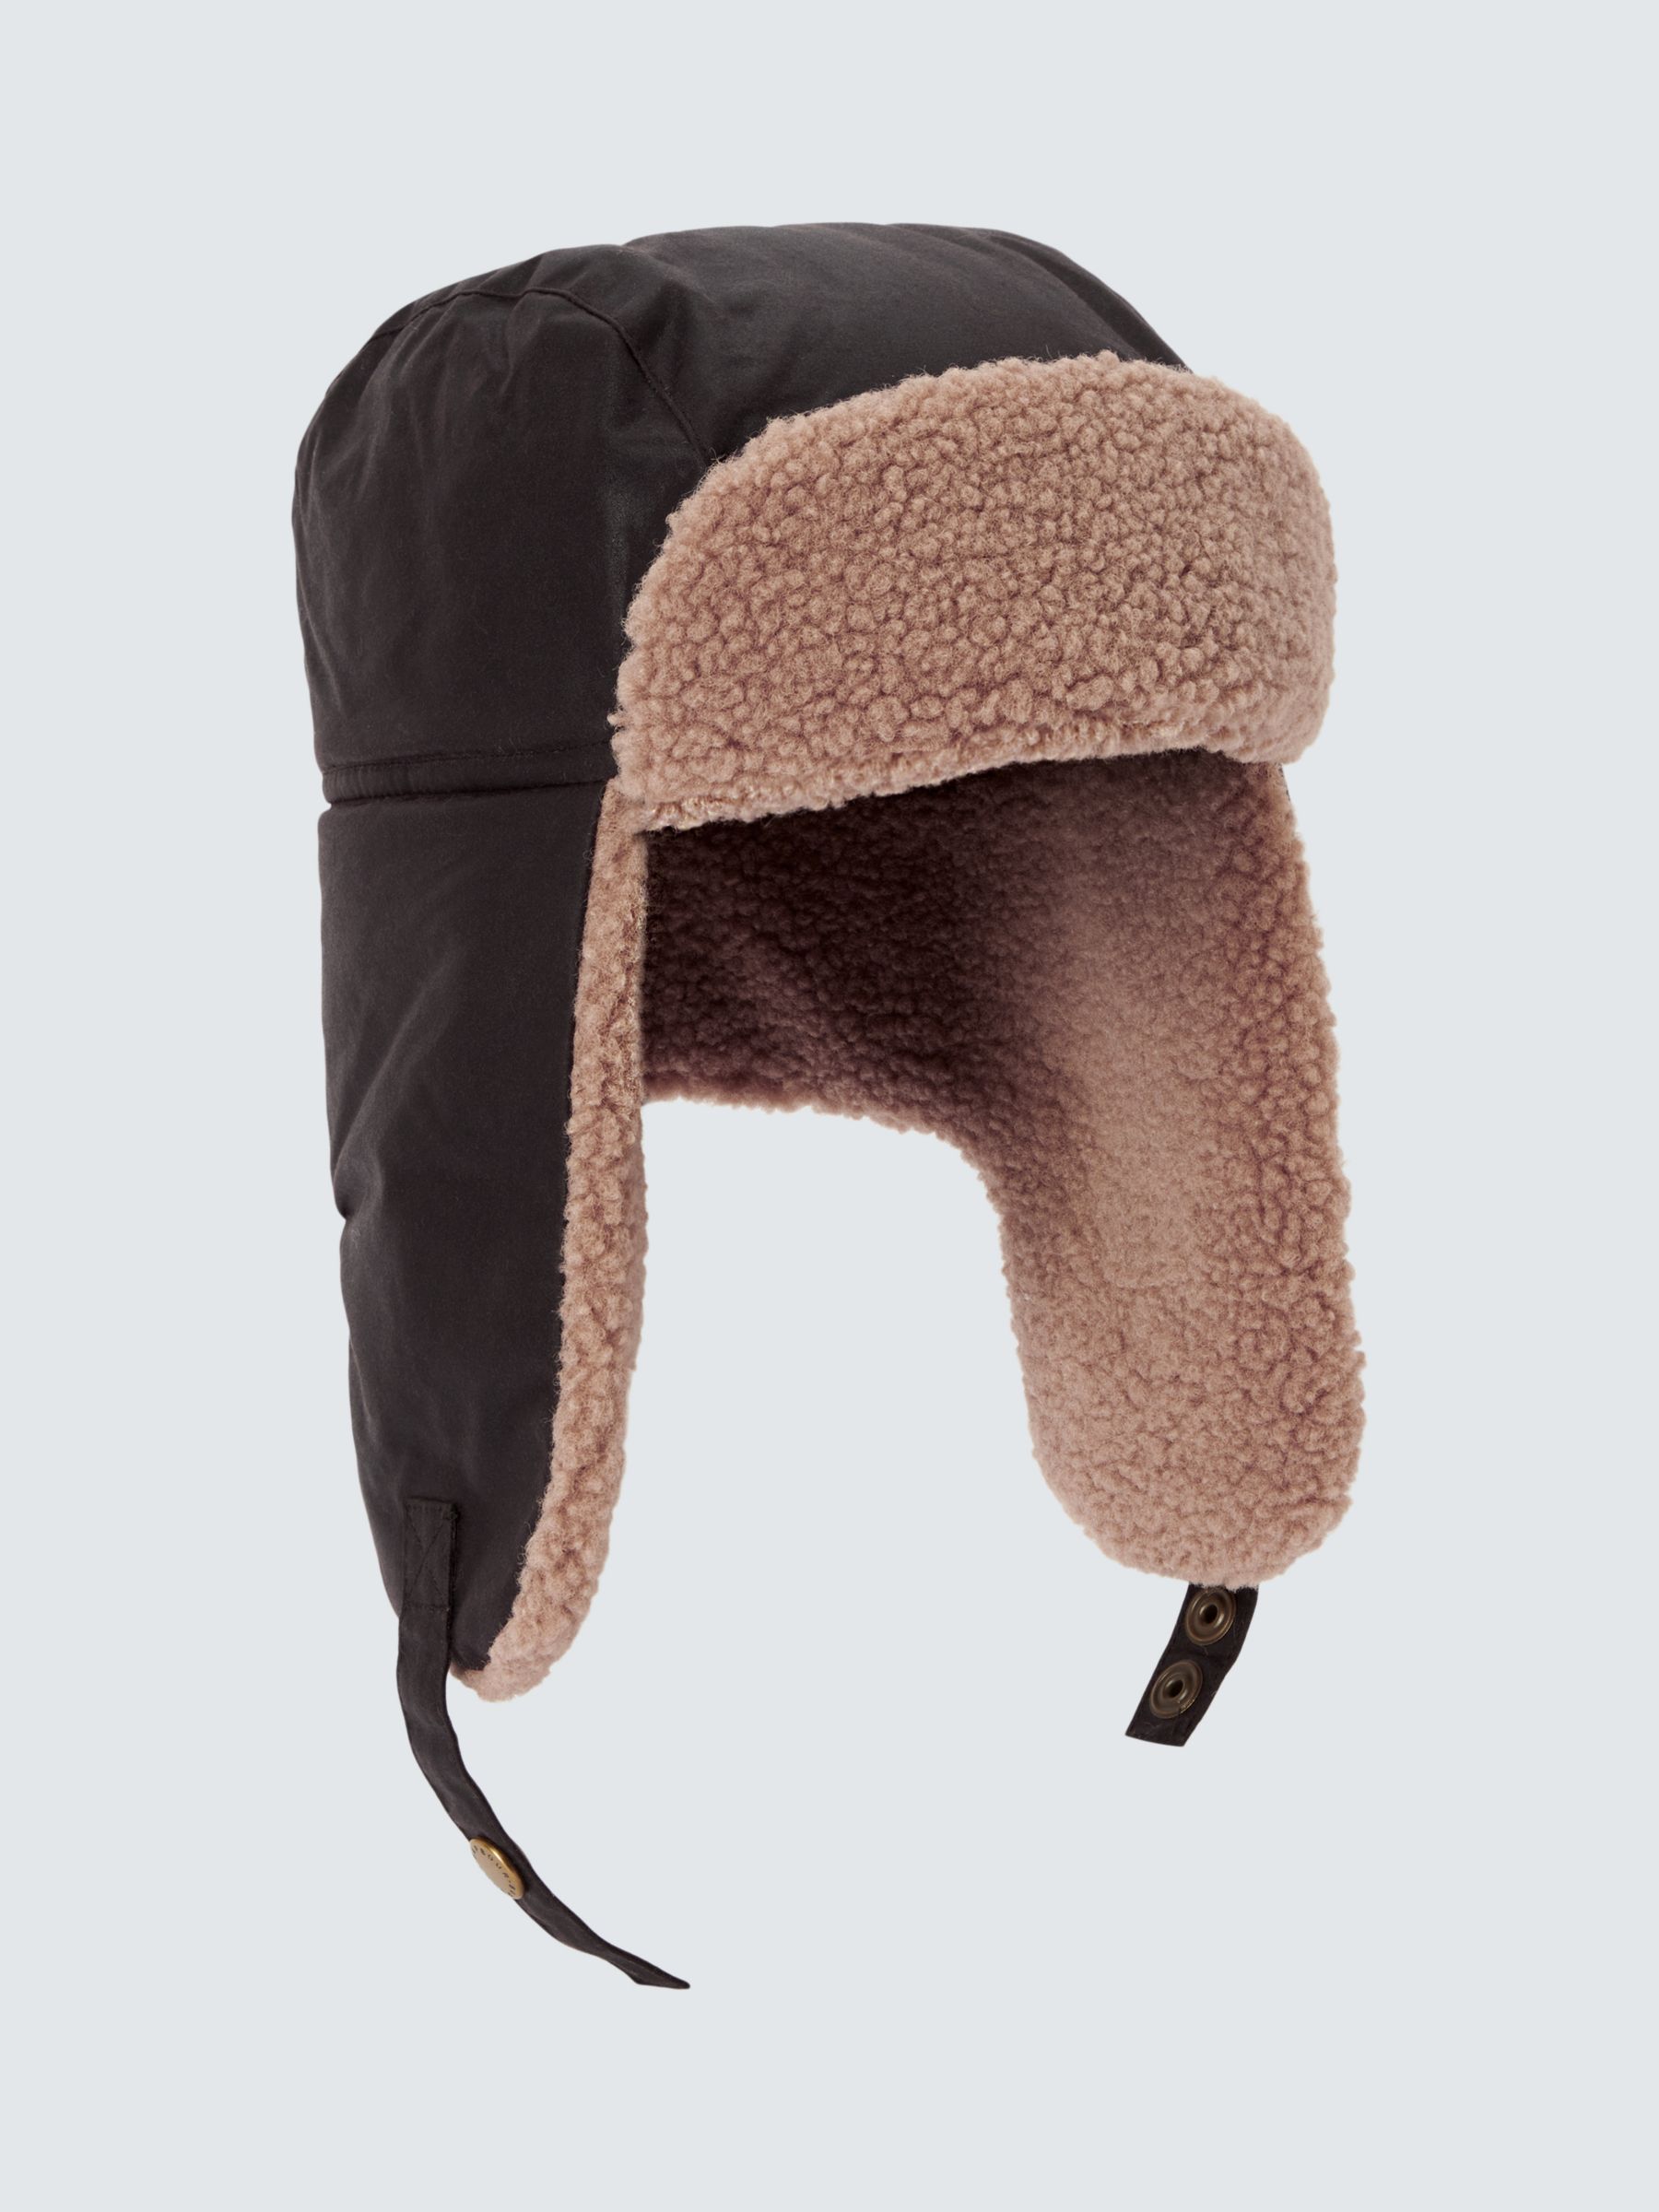 Is the trapper hat the next fashion trend?